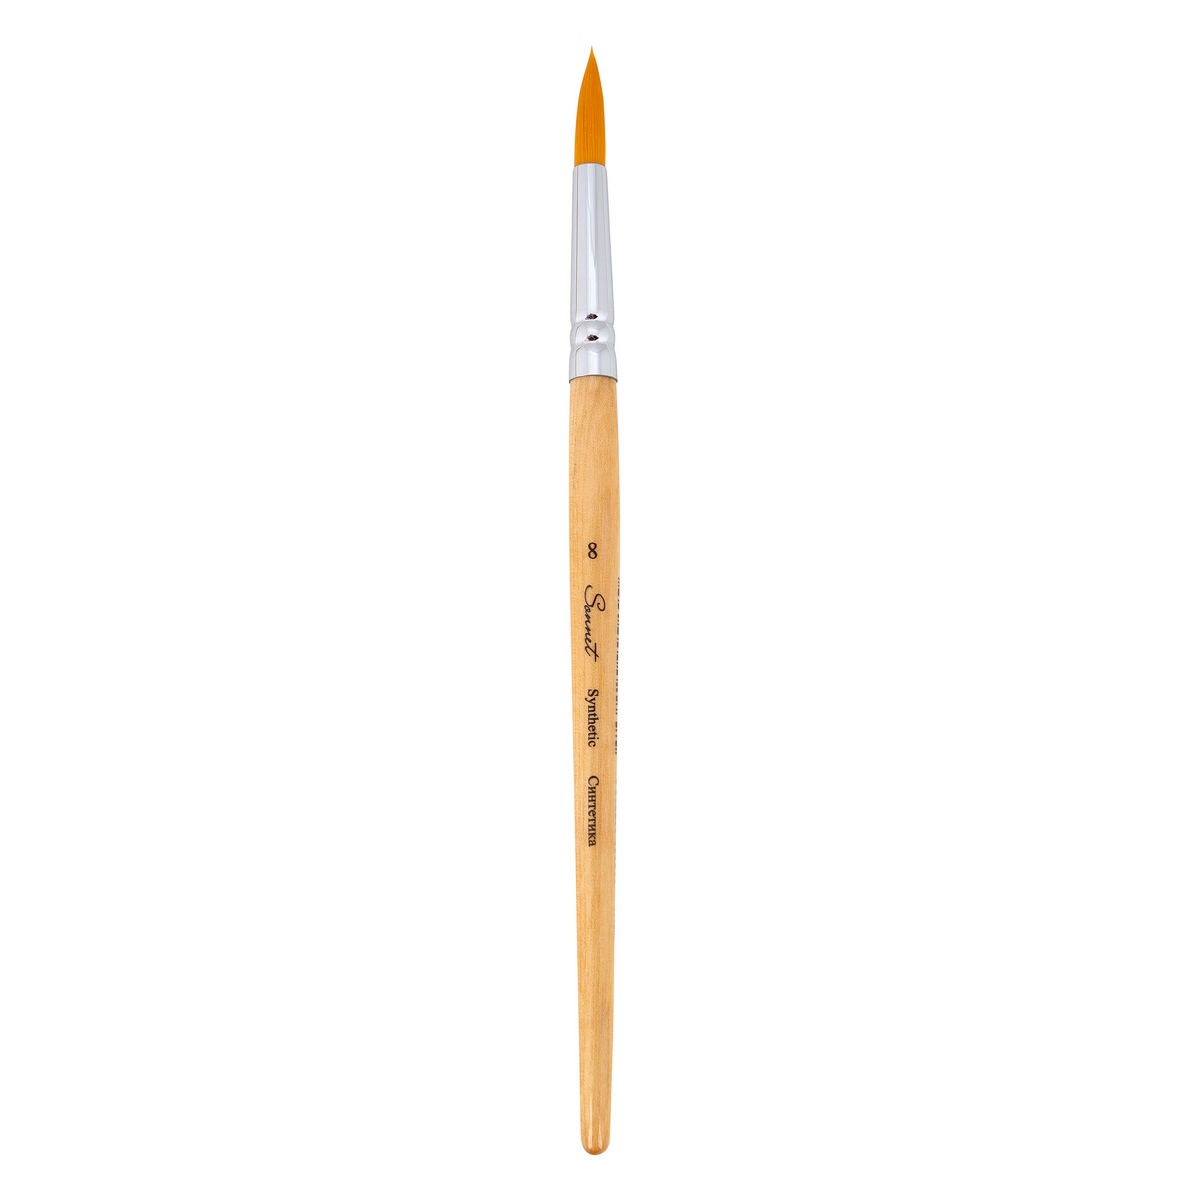 Synthetic "Sonnet" round brush with a short lacquered handle